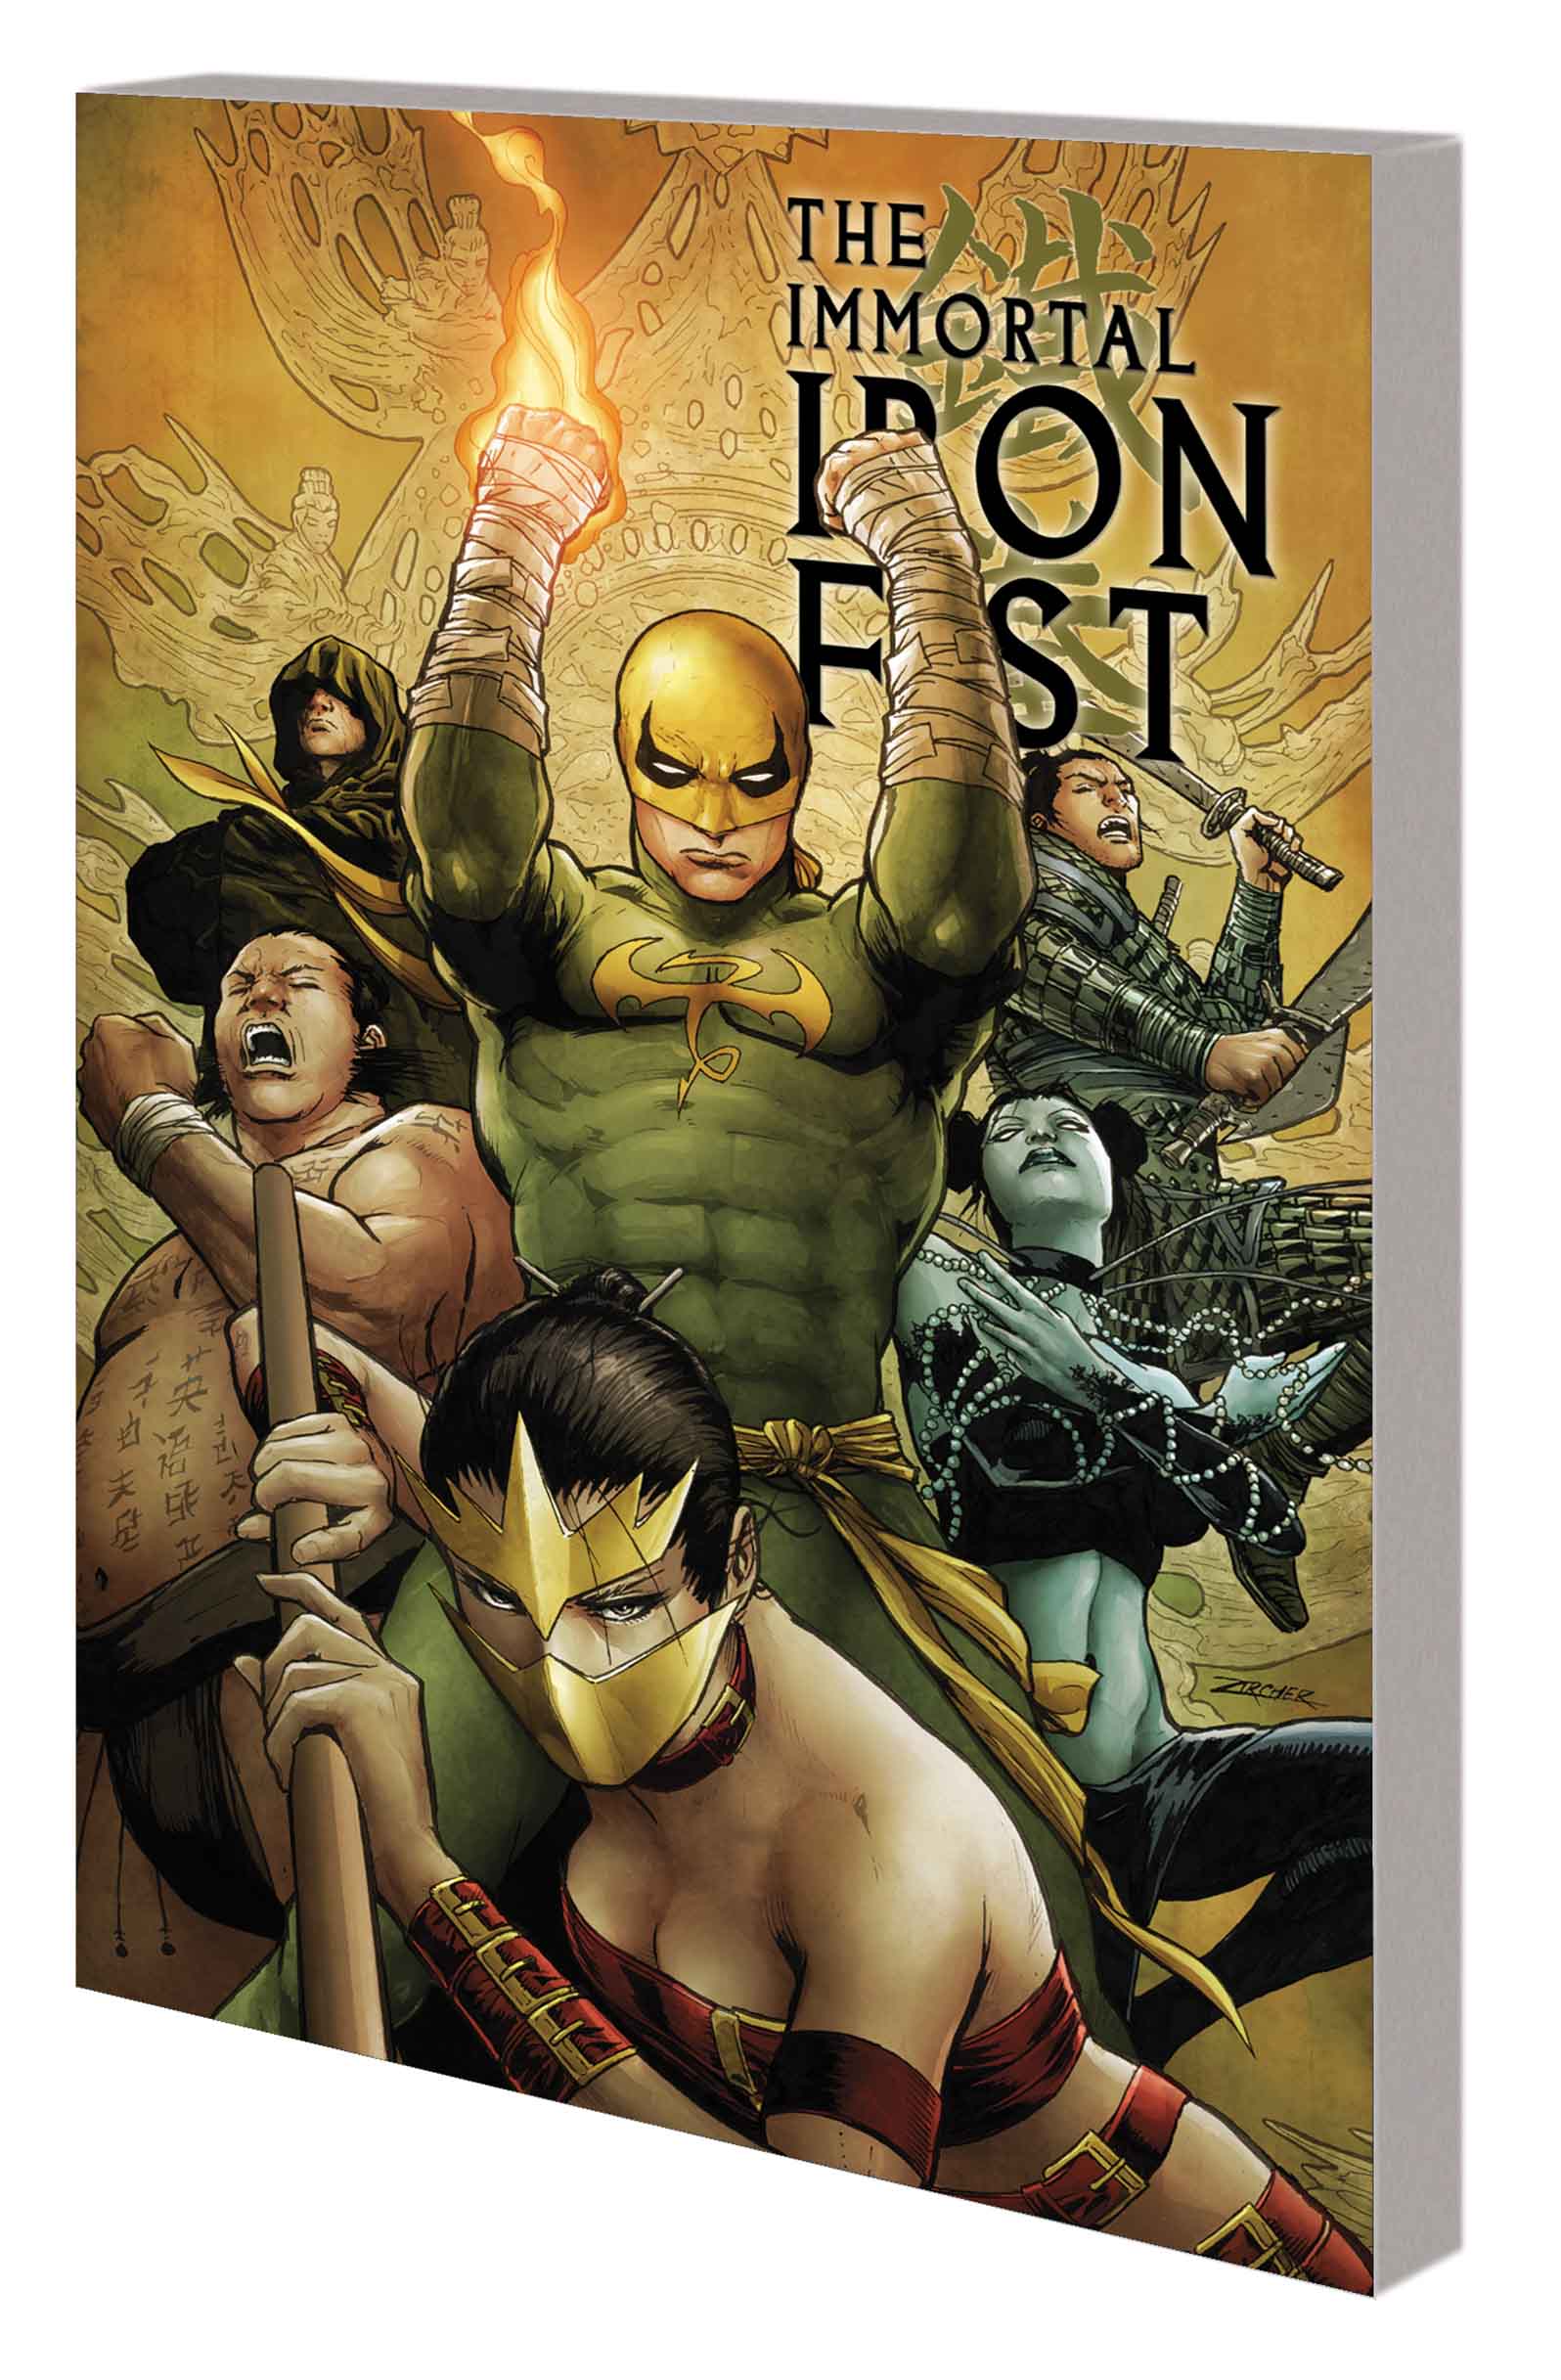 IMMORTAL IRON FIST: THE COMPLETE COLLECTION VOL. 2 TPB (Trade Paperback)